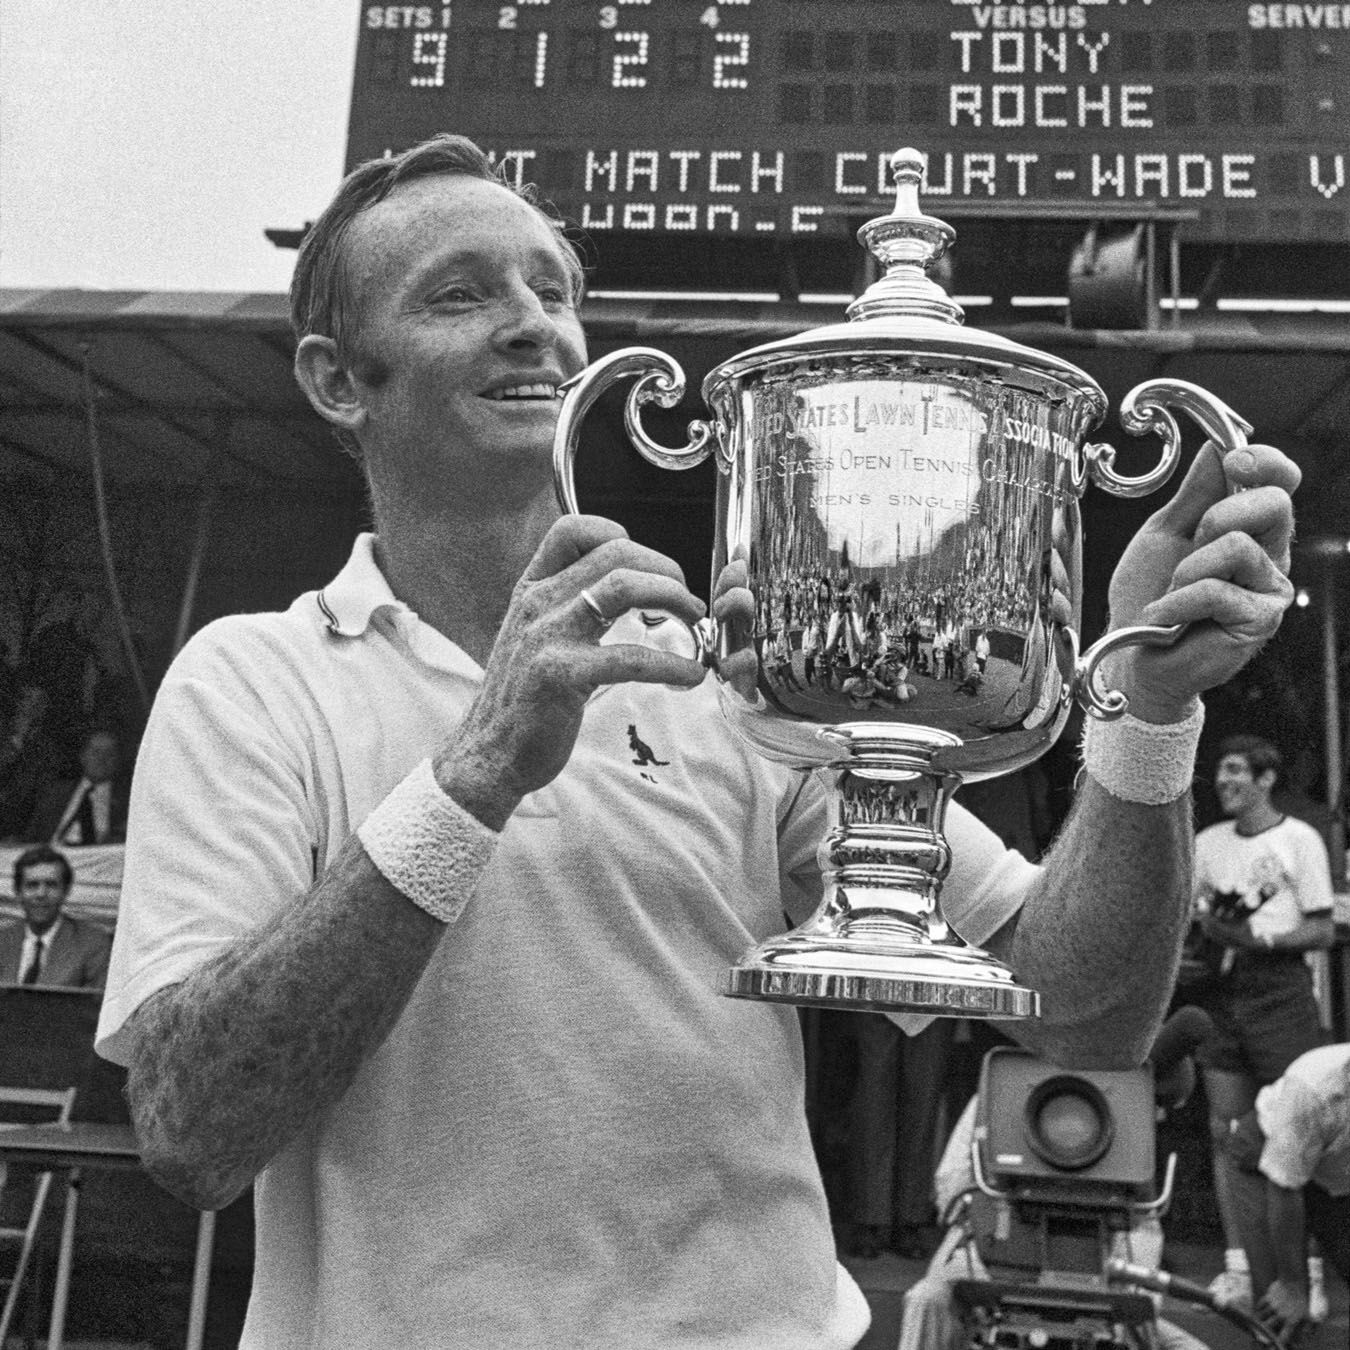 In the mid-20th Century, a player holds up his trophy celebrating his US Open victory.